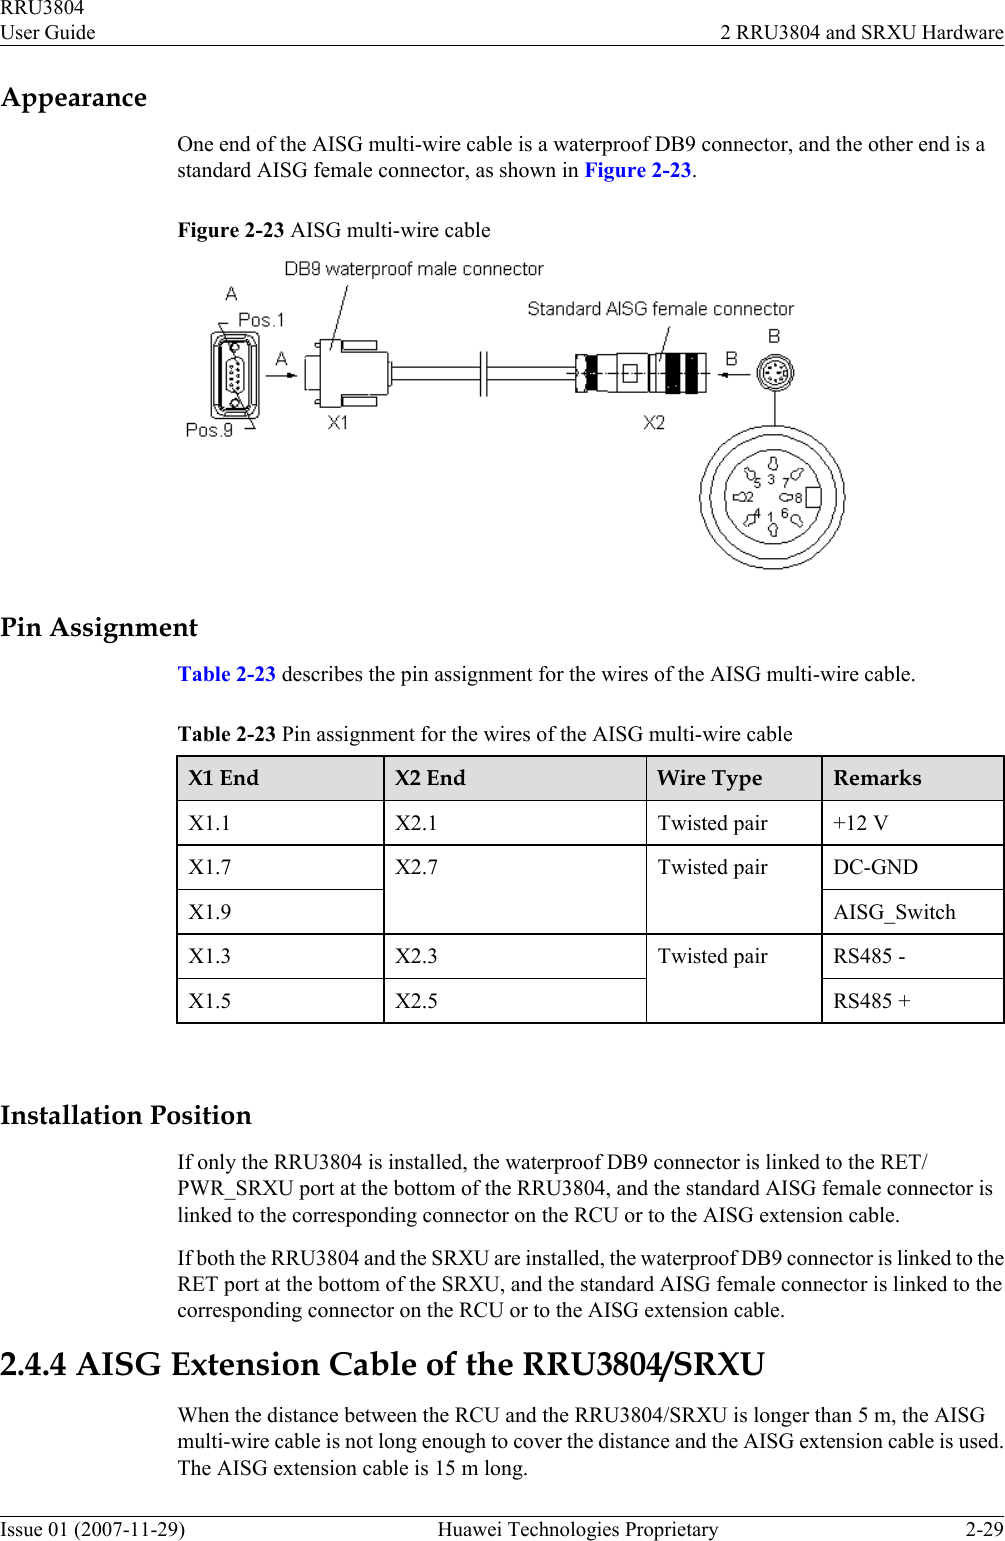 AppearanceOne end of the AISG multi-wire cable is a waterproof DB9 connector, and the other end is astandard AISG female connector, as shown in Figure 2-23.Figure 2-23 AISG multi-wire cablePin AssignmentTable 2-23 describes the pin assignment for the wires of the AISG multi-wire cable.Table 2-23 Pin assignment for the wires of the AISG multi-wire cableX1 End X2 End Wire Type RemarksX1.1 X2.1 Twisted pair +12 VX1.7 X2.7 Twisted pair DC-GNDX1.9 AISG_SwitchX1.3 X2.3 Twisted pair RS485 -X1.5 X2.5 RS485 + Installation PositionIf only the RRU3804 is installed, the waterproof DB9 connector is linked to the RET/PWR_SRXU port at the bottom of the RRU3804, and the standard AISG female connector islinked to the corresponding connector on the RCU or to the AISG extension cable.If both the RRU3804 and the SRXU are installed, the waterproof DB9 connector is linked to theRET port at the bottom of the SRXU, and the standard AISG female connector is linked to thecorresponding connector on the RCU or to the AISG extension cable.2.4.4 AISG Extension Cable of the RRU3804/SRXUWhen the distance between the RCU and the RRU3804/SRXU is longer than 5 m, the AISGmulti-wire cable is not long enough to cover the distance and the AISG extension cable is used.The AISG extension cable is 15 m long.RRU3804User Guide 2 RRU3804 and SRXU HardwareIssue 01 (2007-11-29)  Huawei Technologies Proprietary 2-29